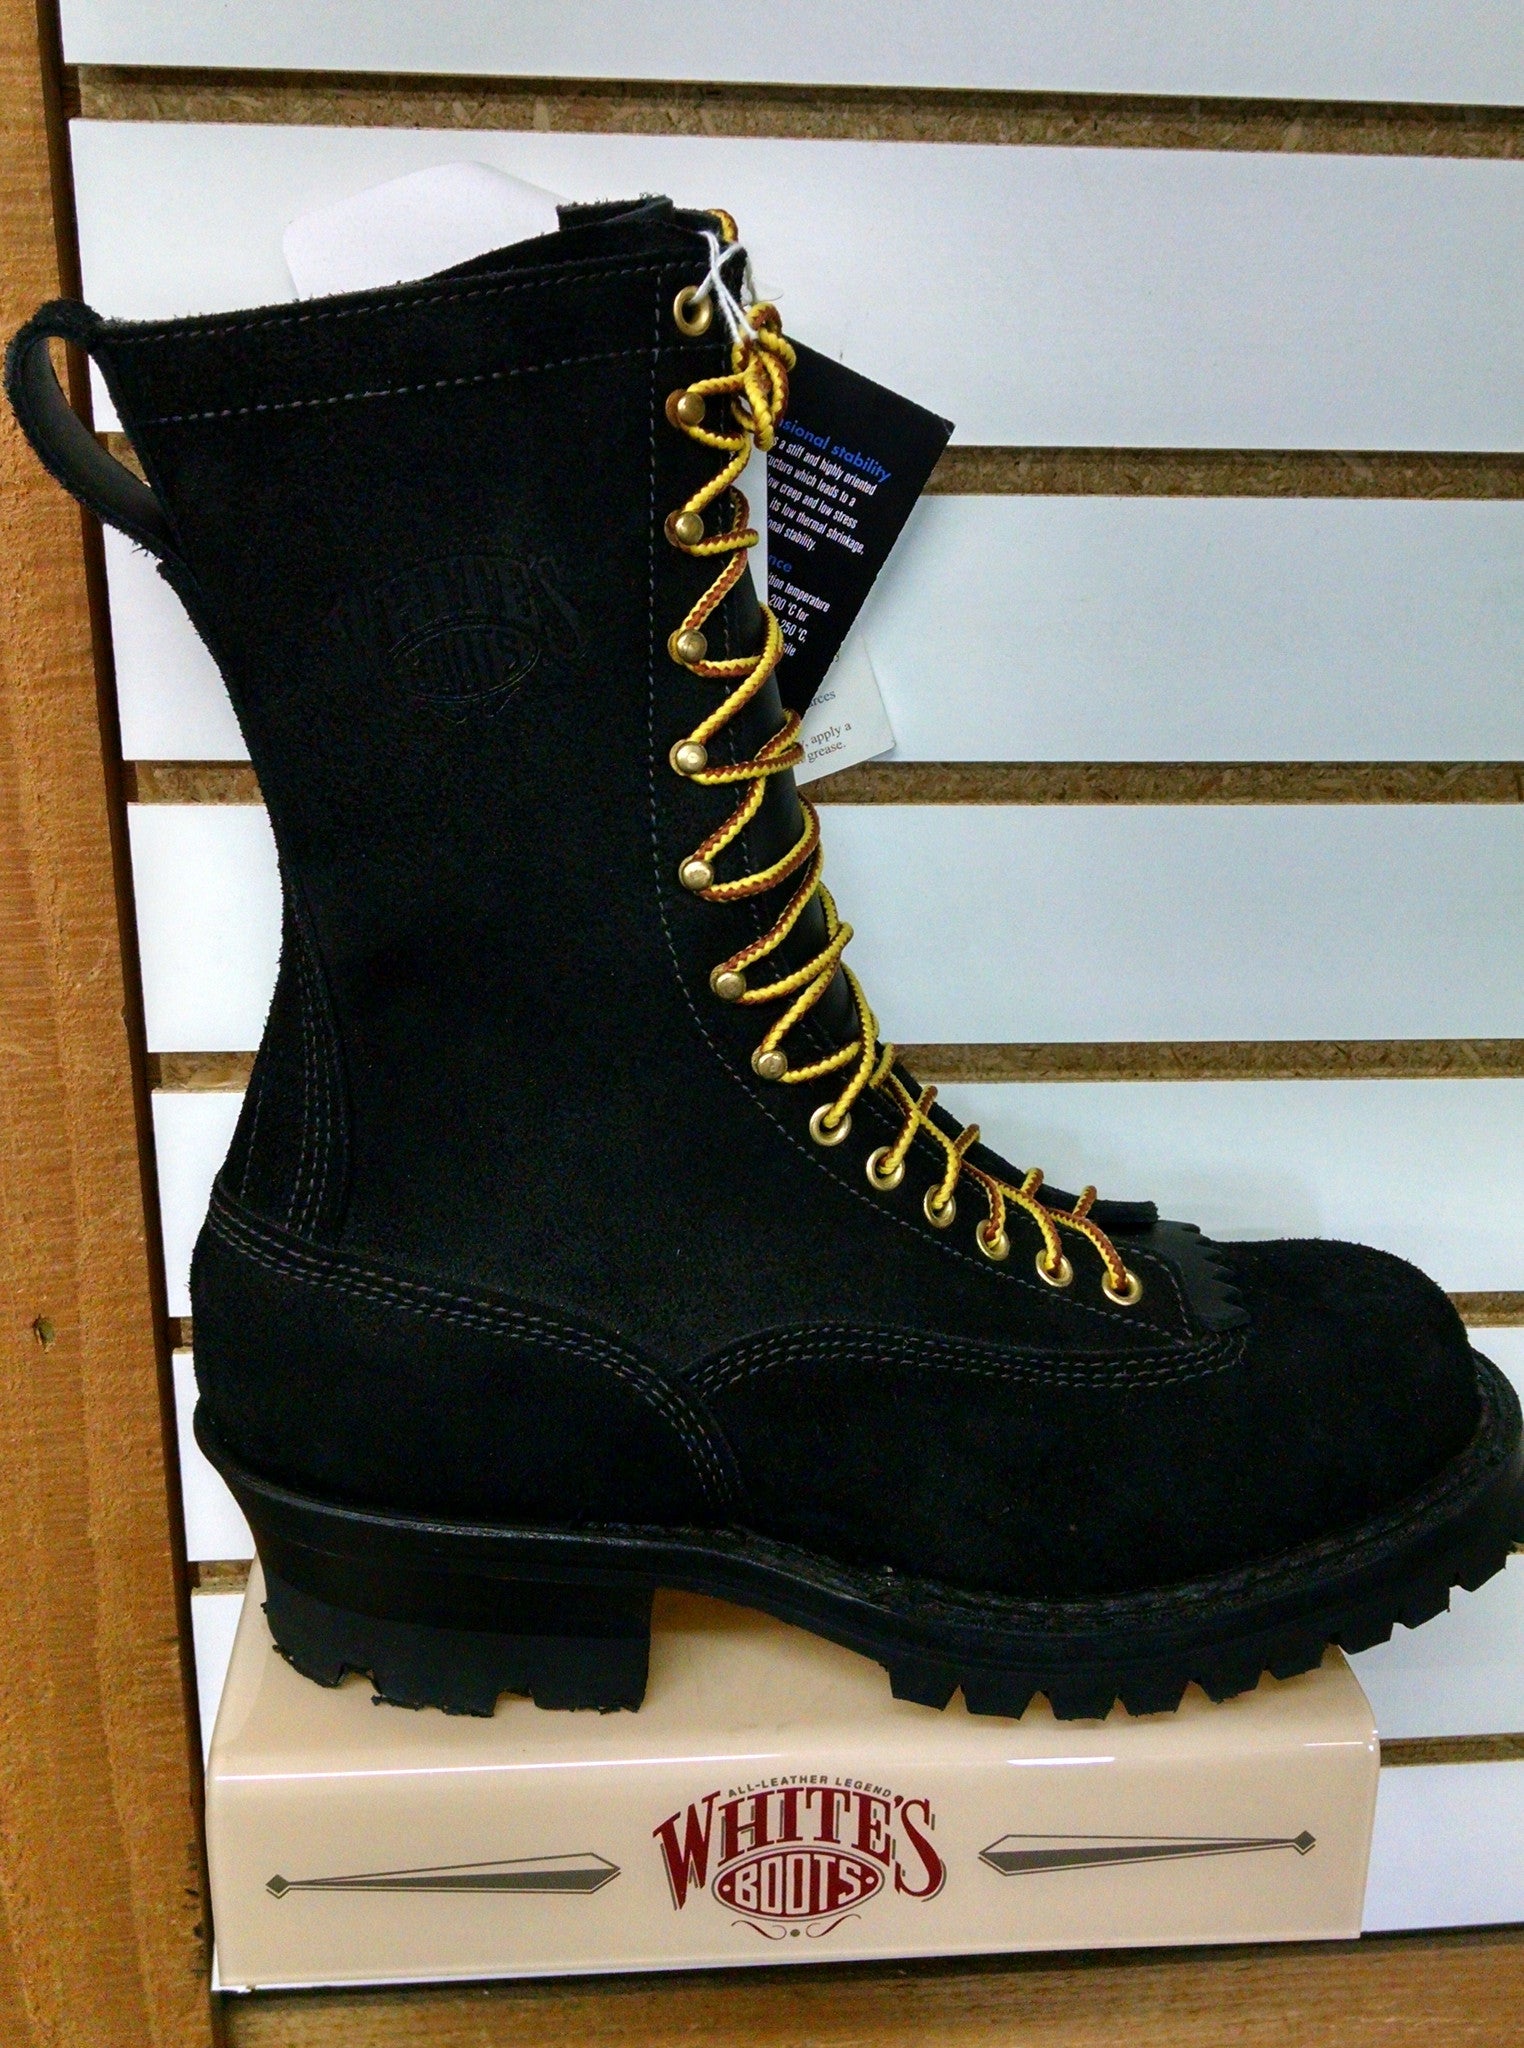 white smokejumpers boots